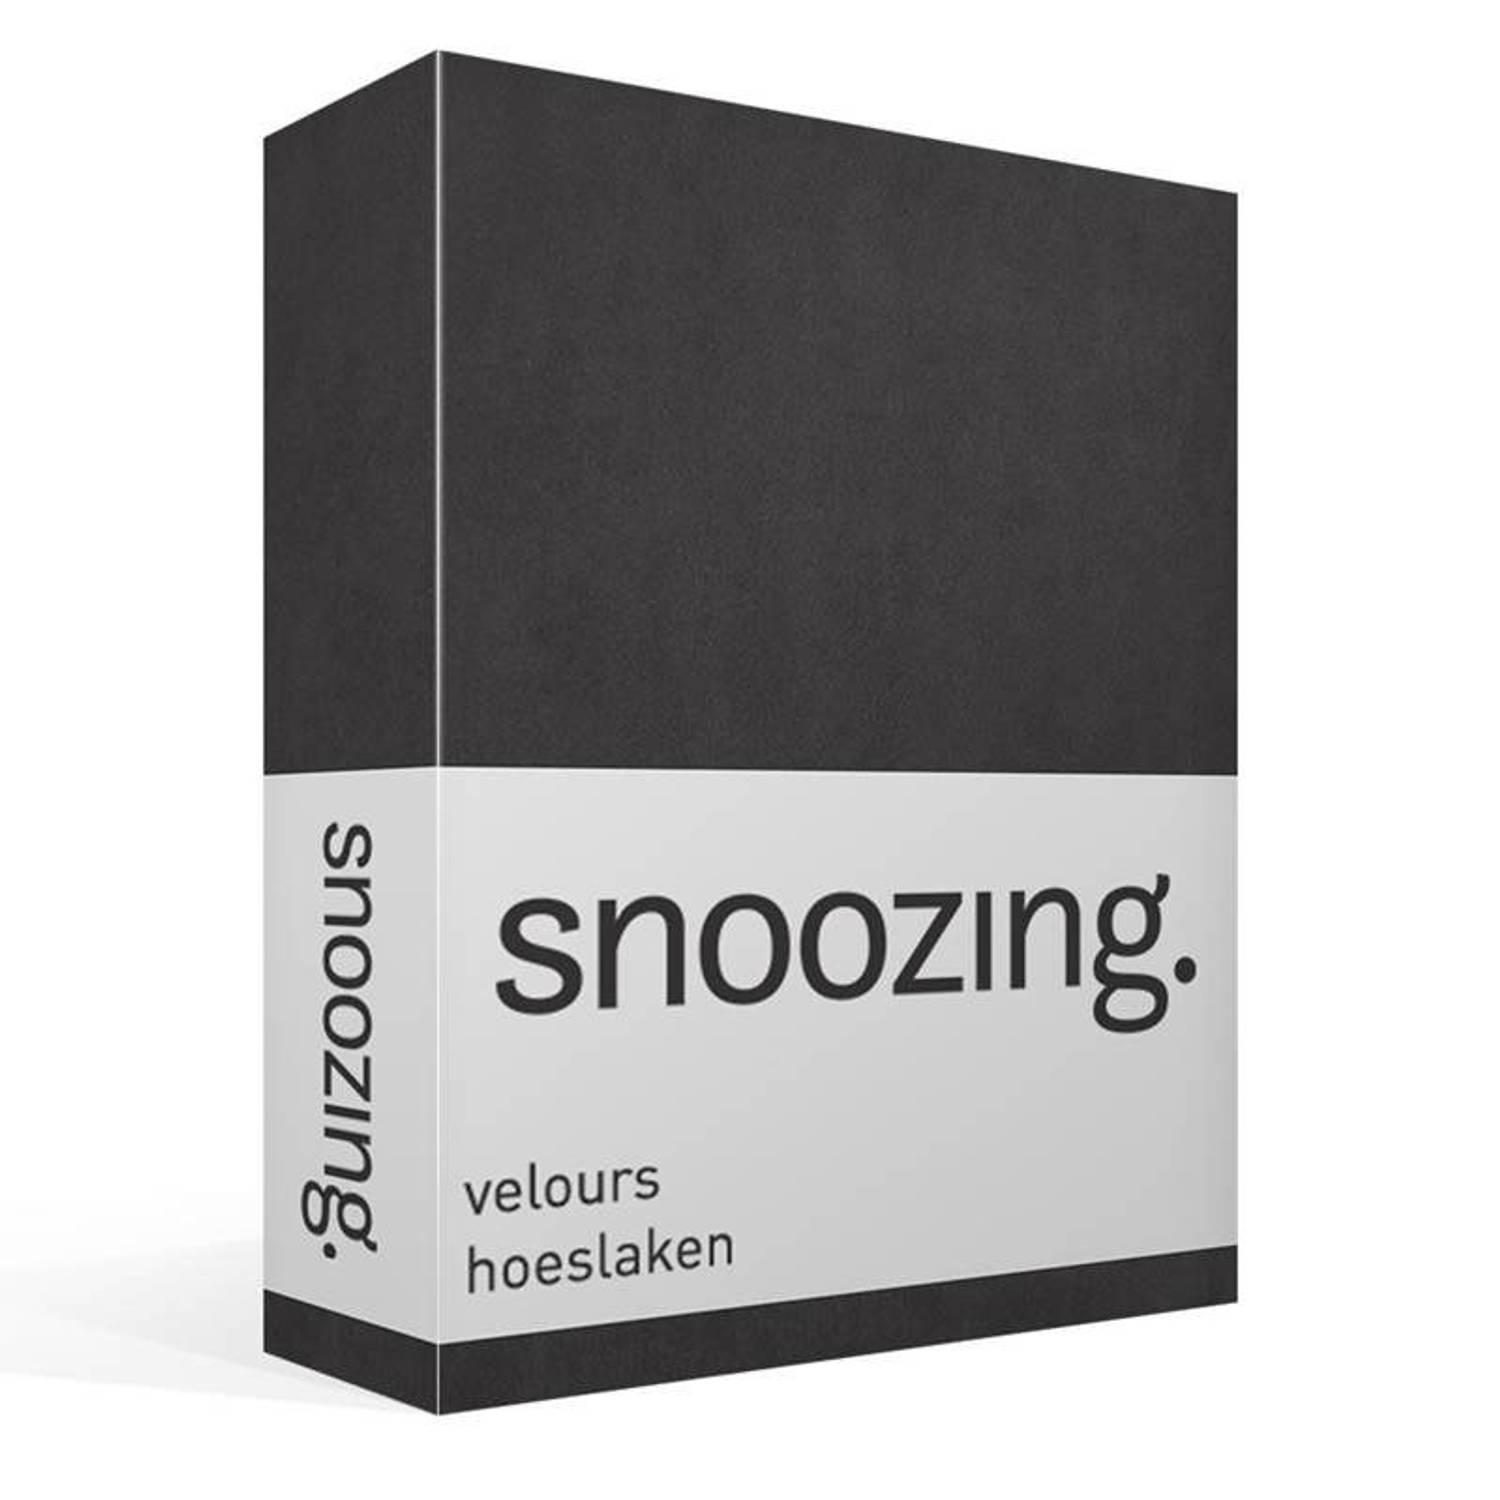 Snoozing velours hoeslaken - Extra breed - Antraciet